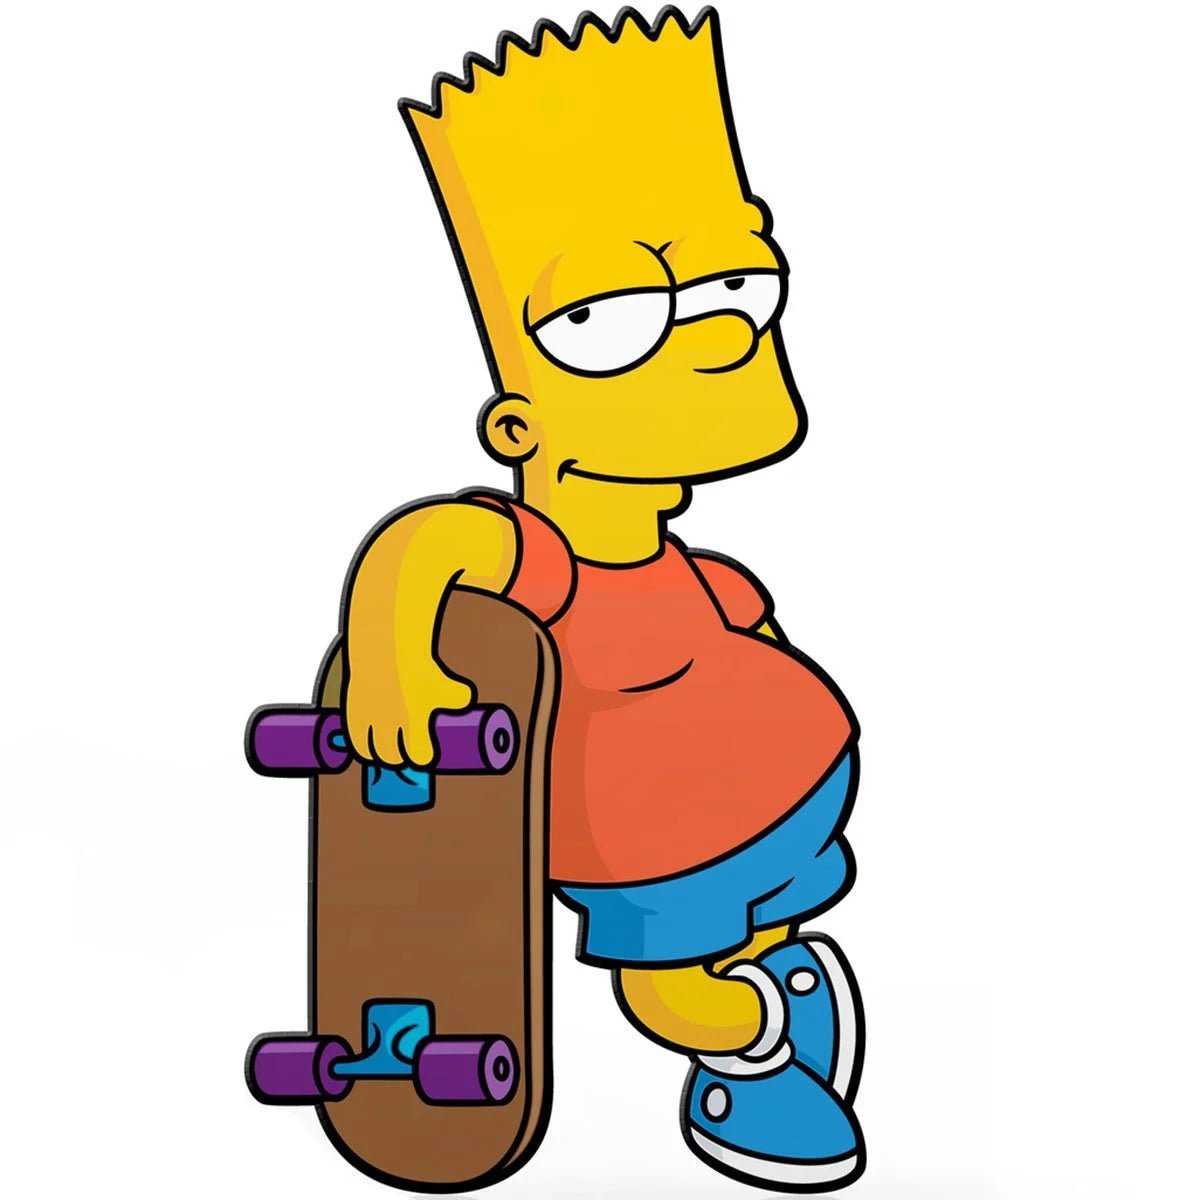 The Simpsons Bart Simpson with Skateboard FiGPiN Classic 3-Inch Pin #870 - Simon's Collectibles